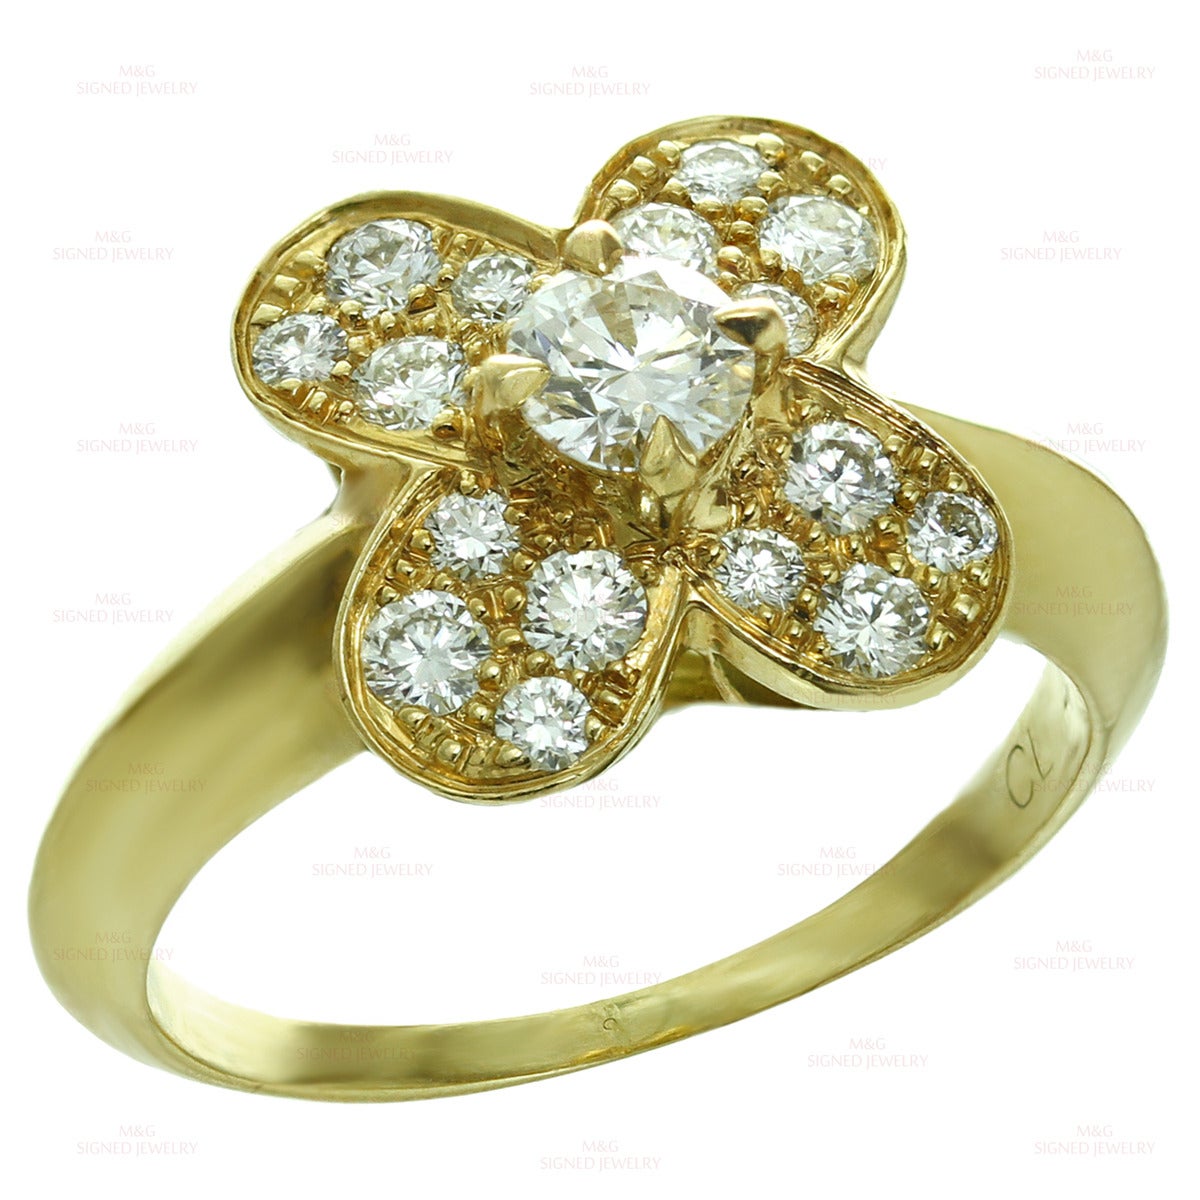 This stunning Van Cleefs & Arpels ring from the classic Trefle collection is made in 18k yellow gold and features a clover motif set with brilliant-cut round E-F VVS2-VS1 diamonds of an estimated 0.50 carats. Made in France circa 1990s.